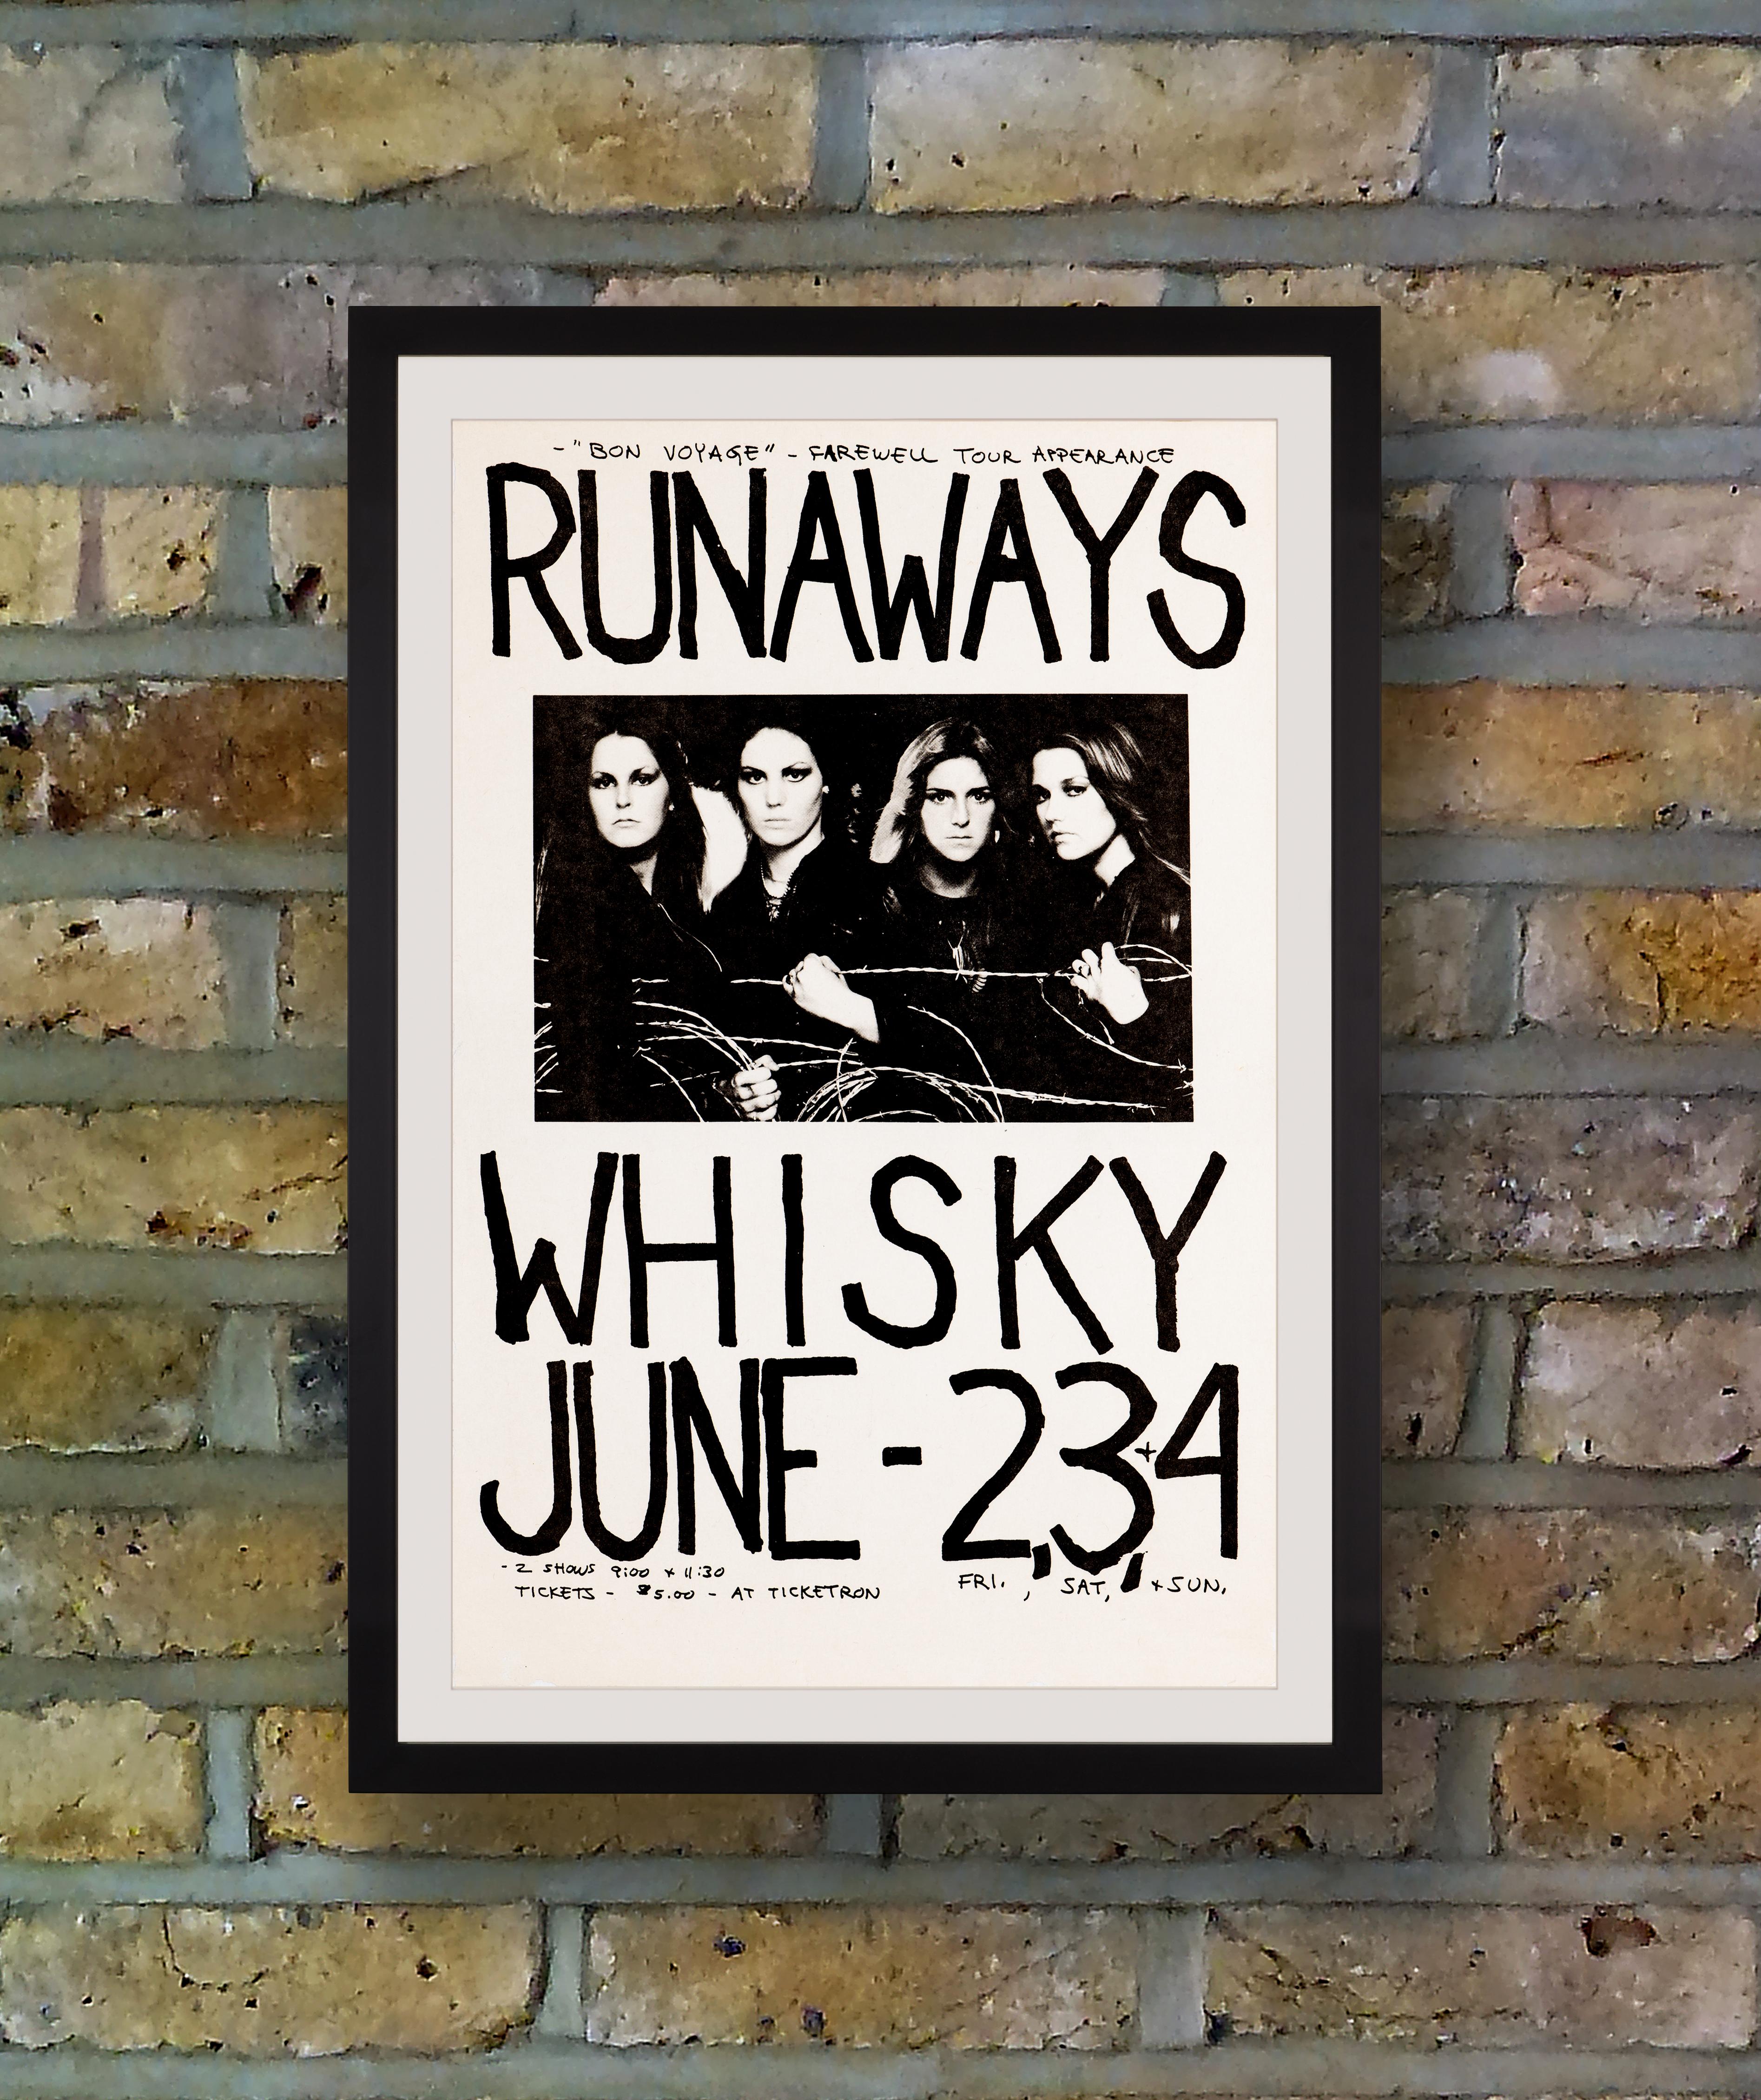 A simple black and white boxing-style poster for a series of performances by all-female American rock band the Runaways at Los Angeles' famous Whisky-A-Go-Go nightclub on the Sunset Strip from Friday 2nd to Sunday 4th June 1978. Originally